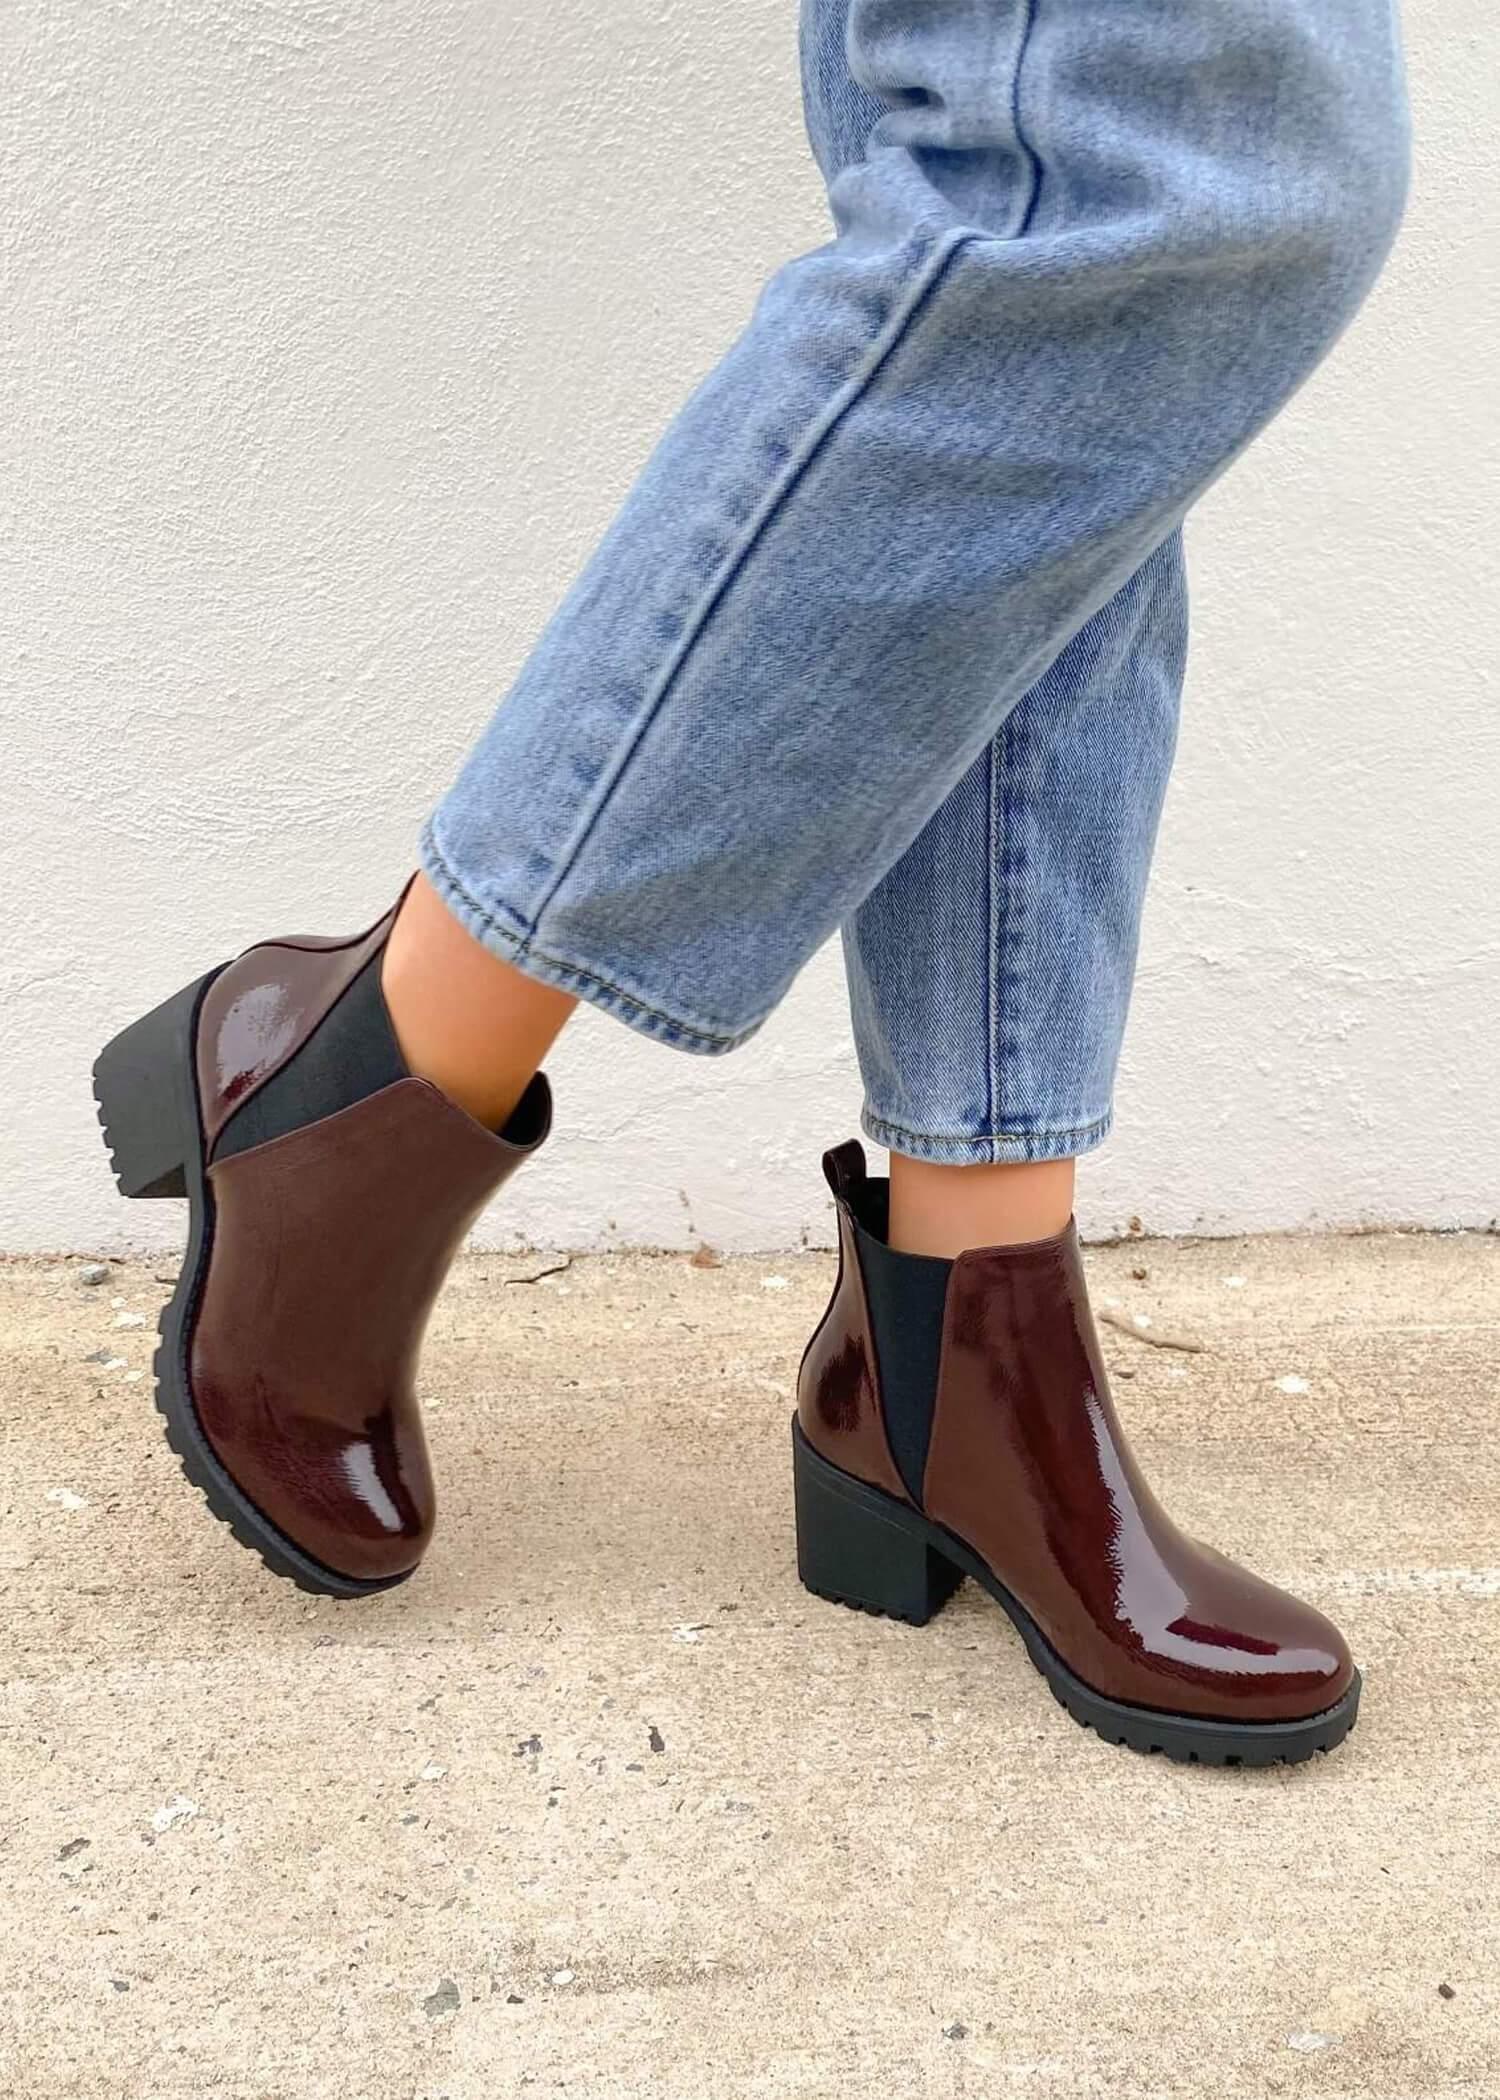 Take Me On Booties - Burgundy Shoes MerciGrace Boutique.